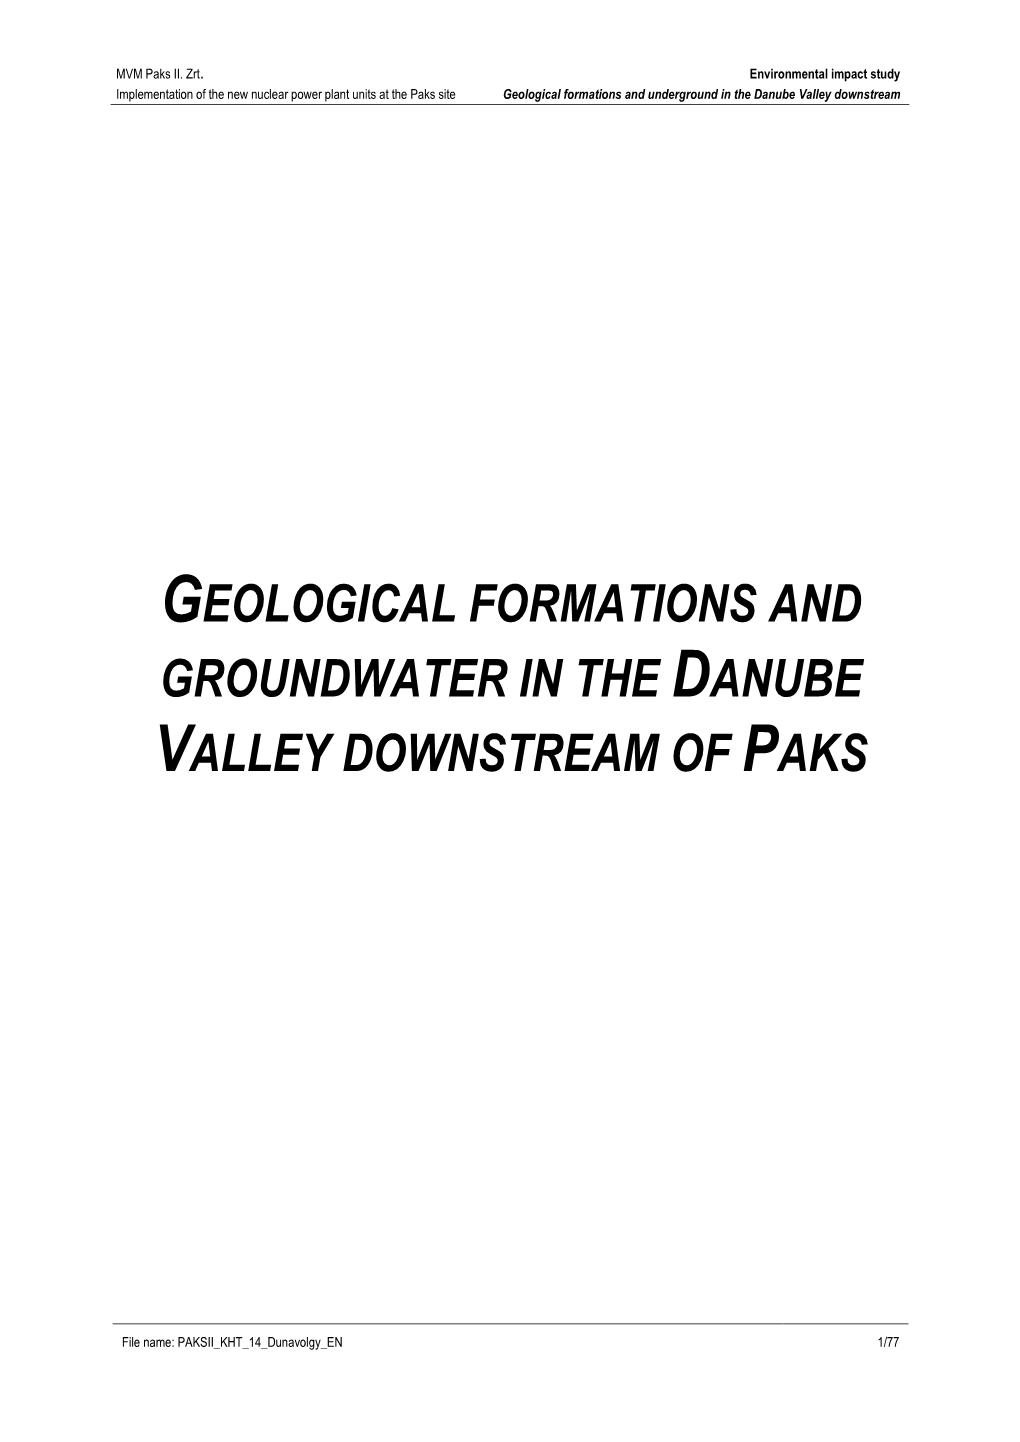 Geological Formations and Groundwater in the Danube Valley Downstream of Paks